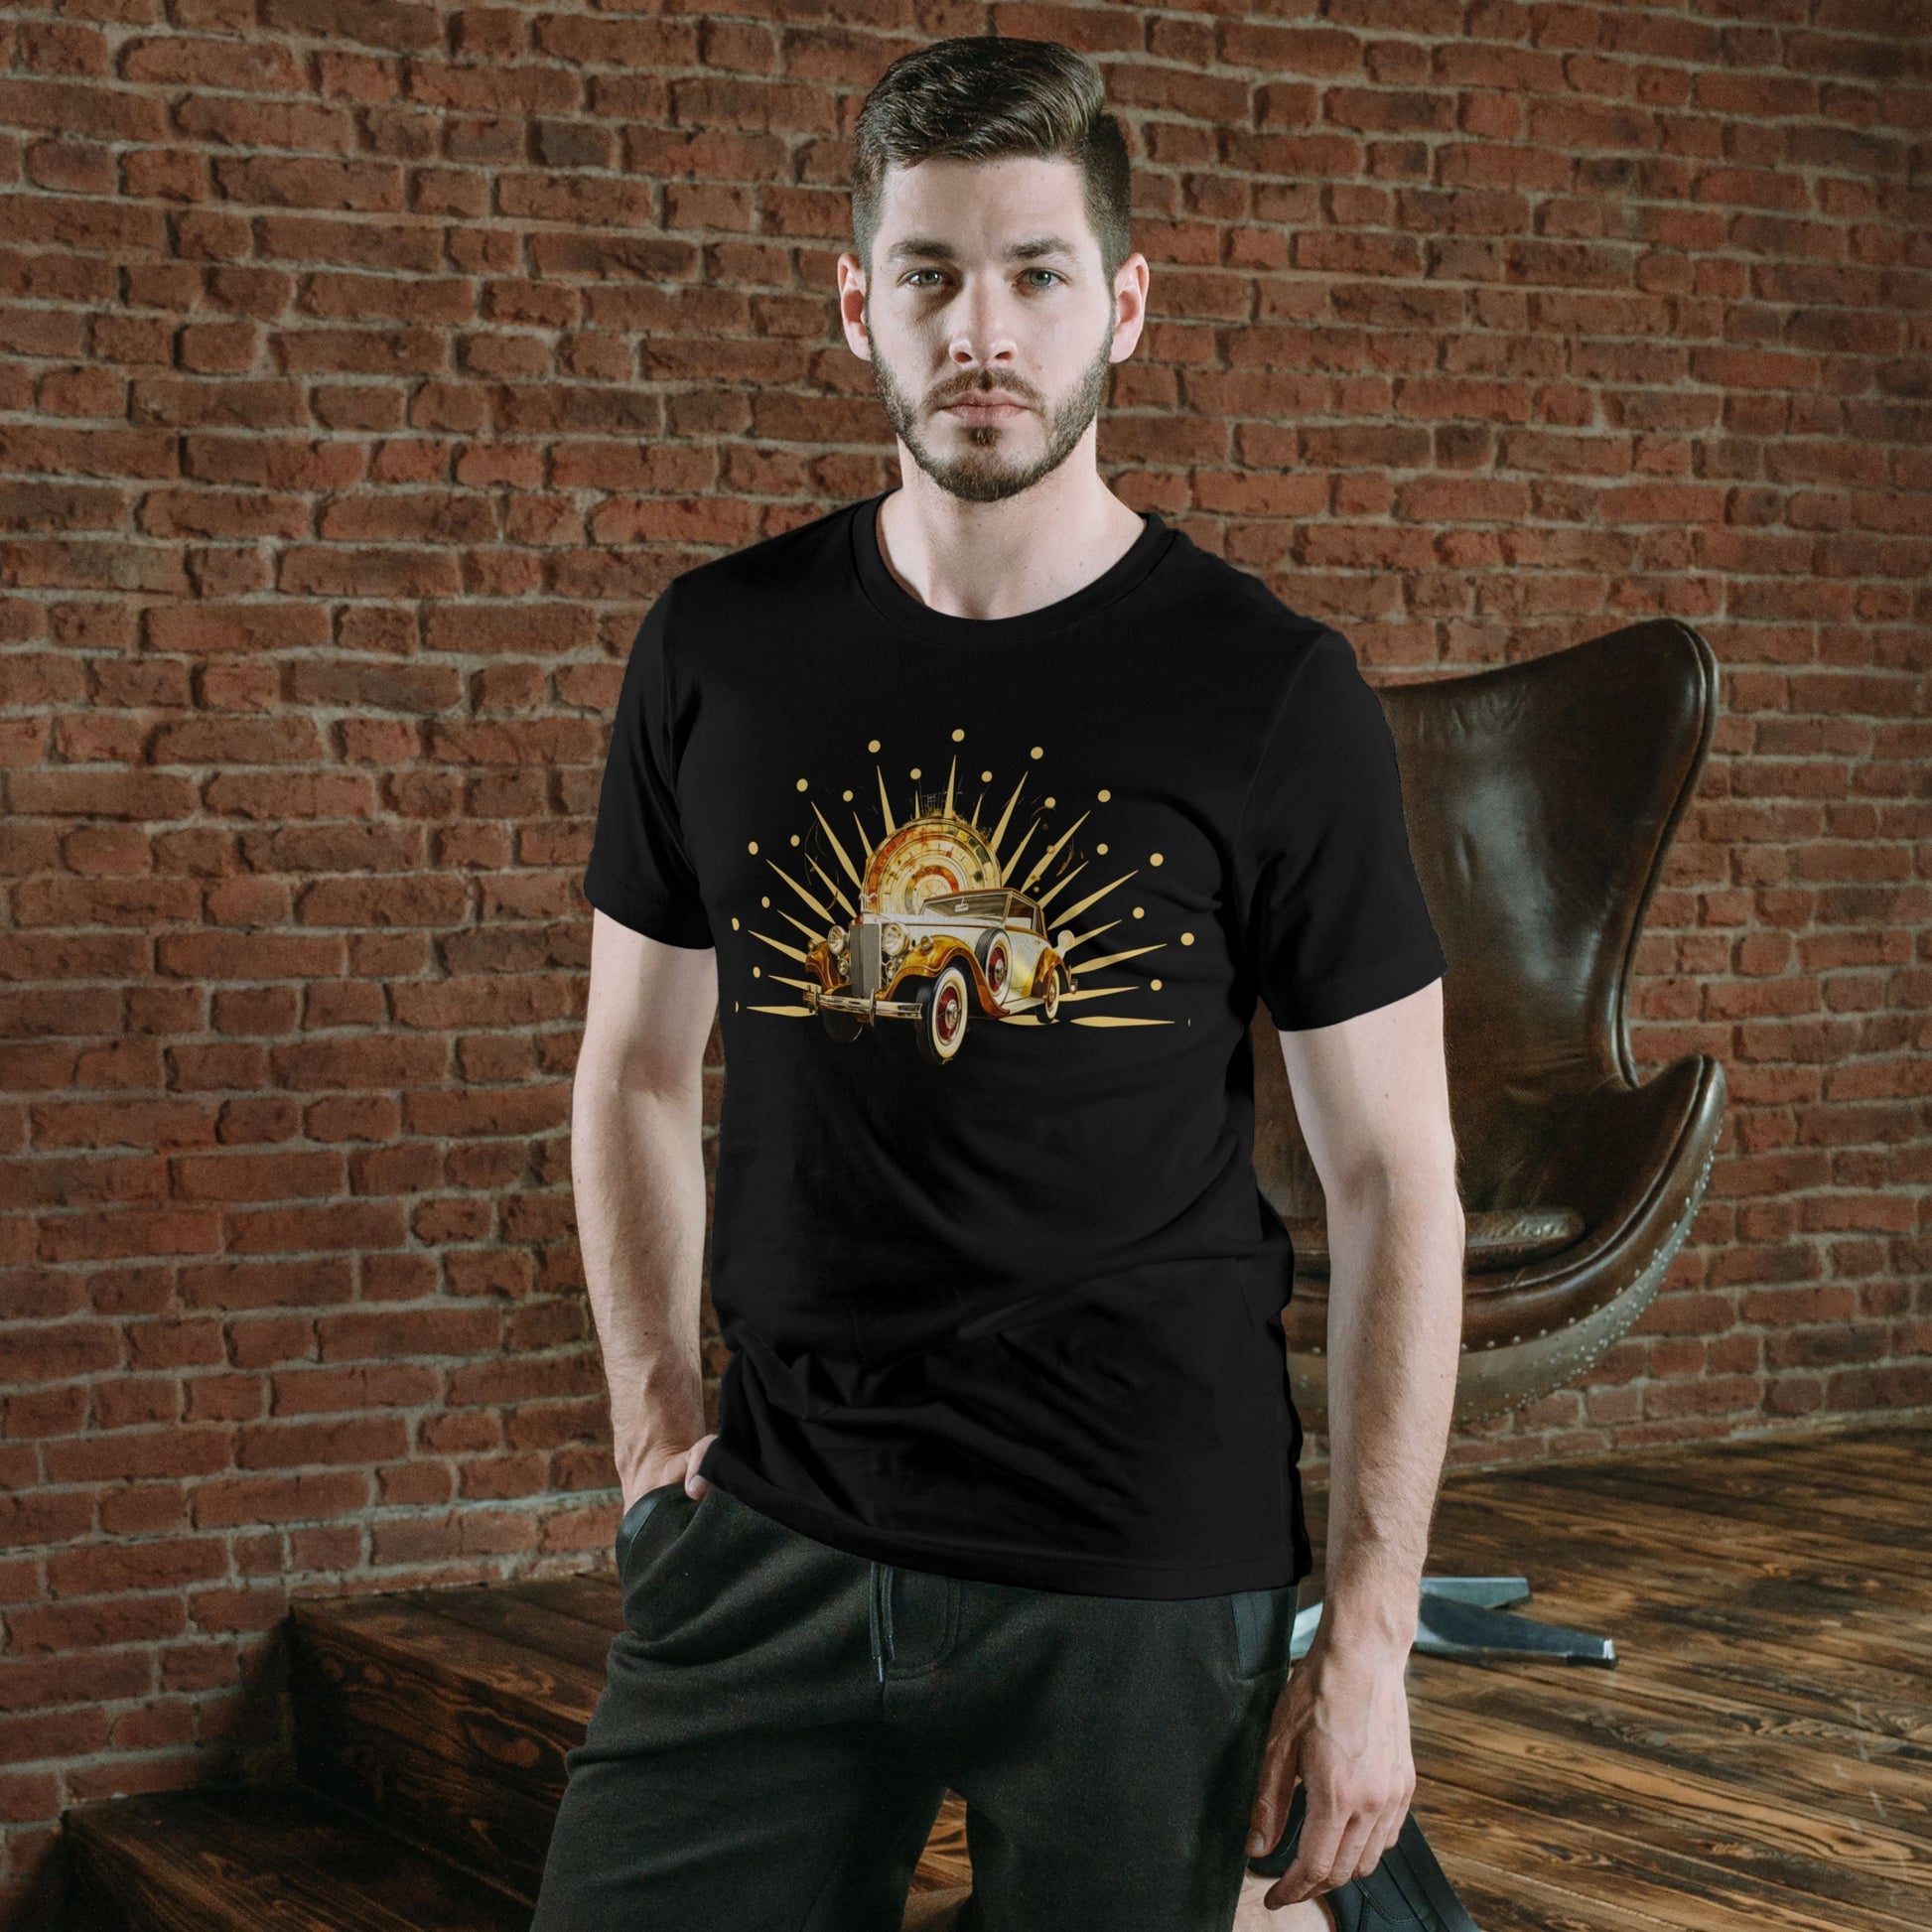 Vintage Car Enthusiast T-Shirt with Classic Wheels and Timeless Appeal Nostalgic T-Shirt   